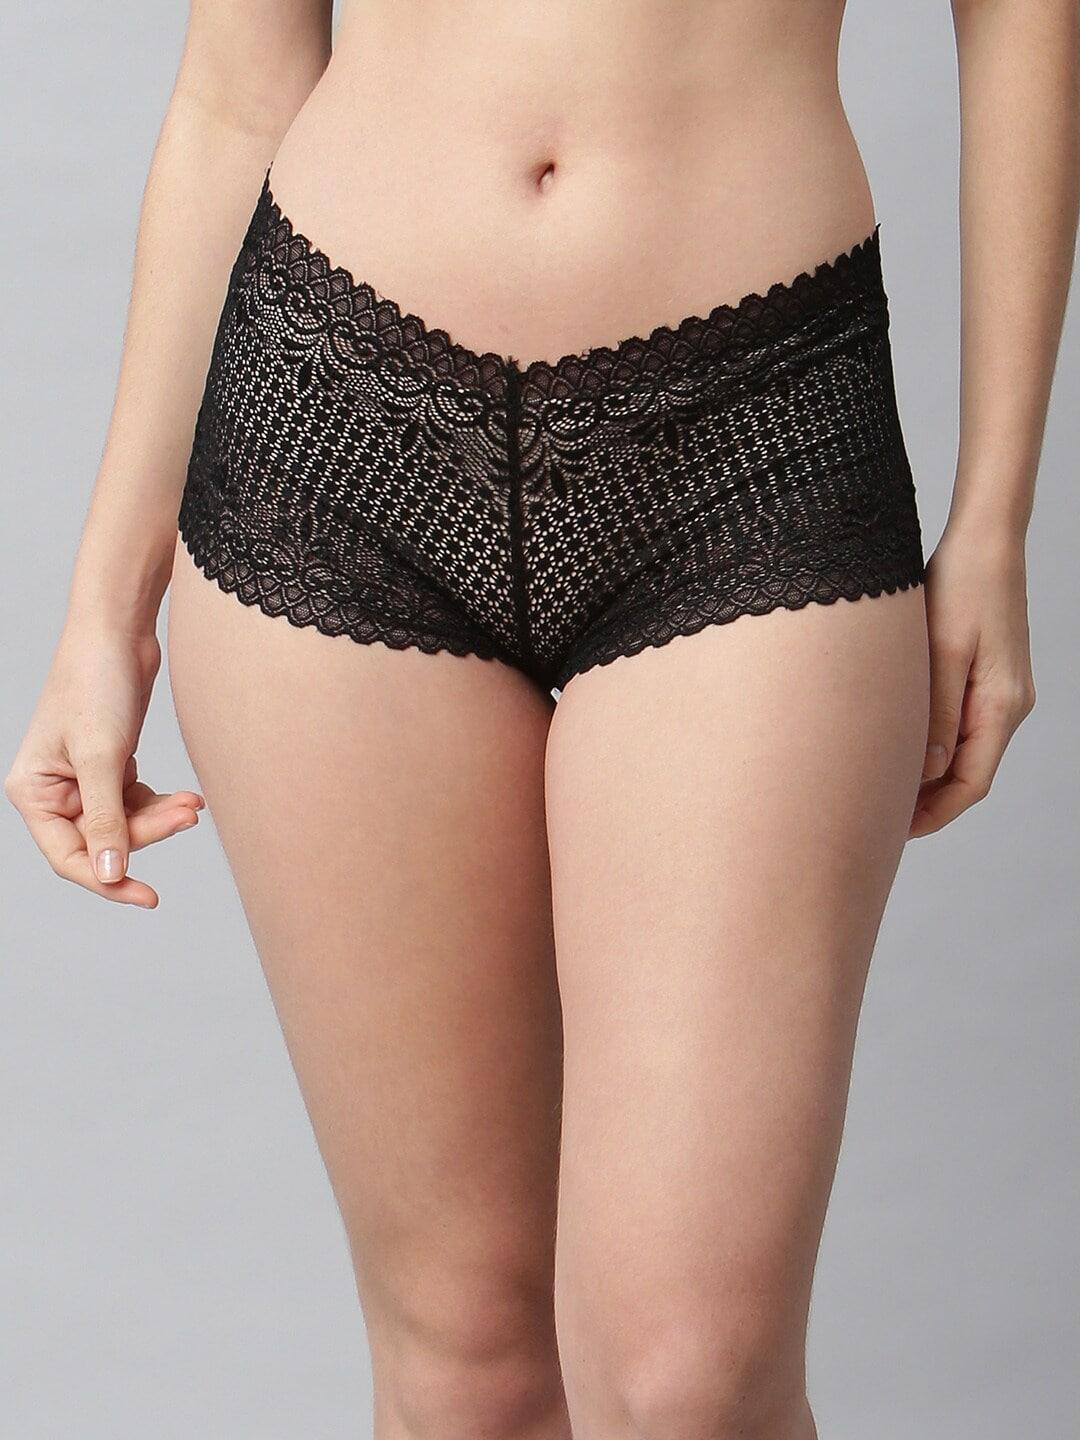 cukoo-women-black-lace--hipster-panty-bp21-025